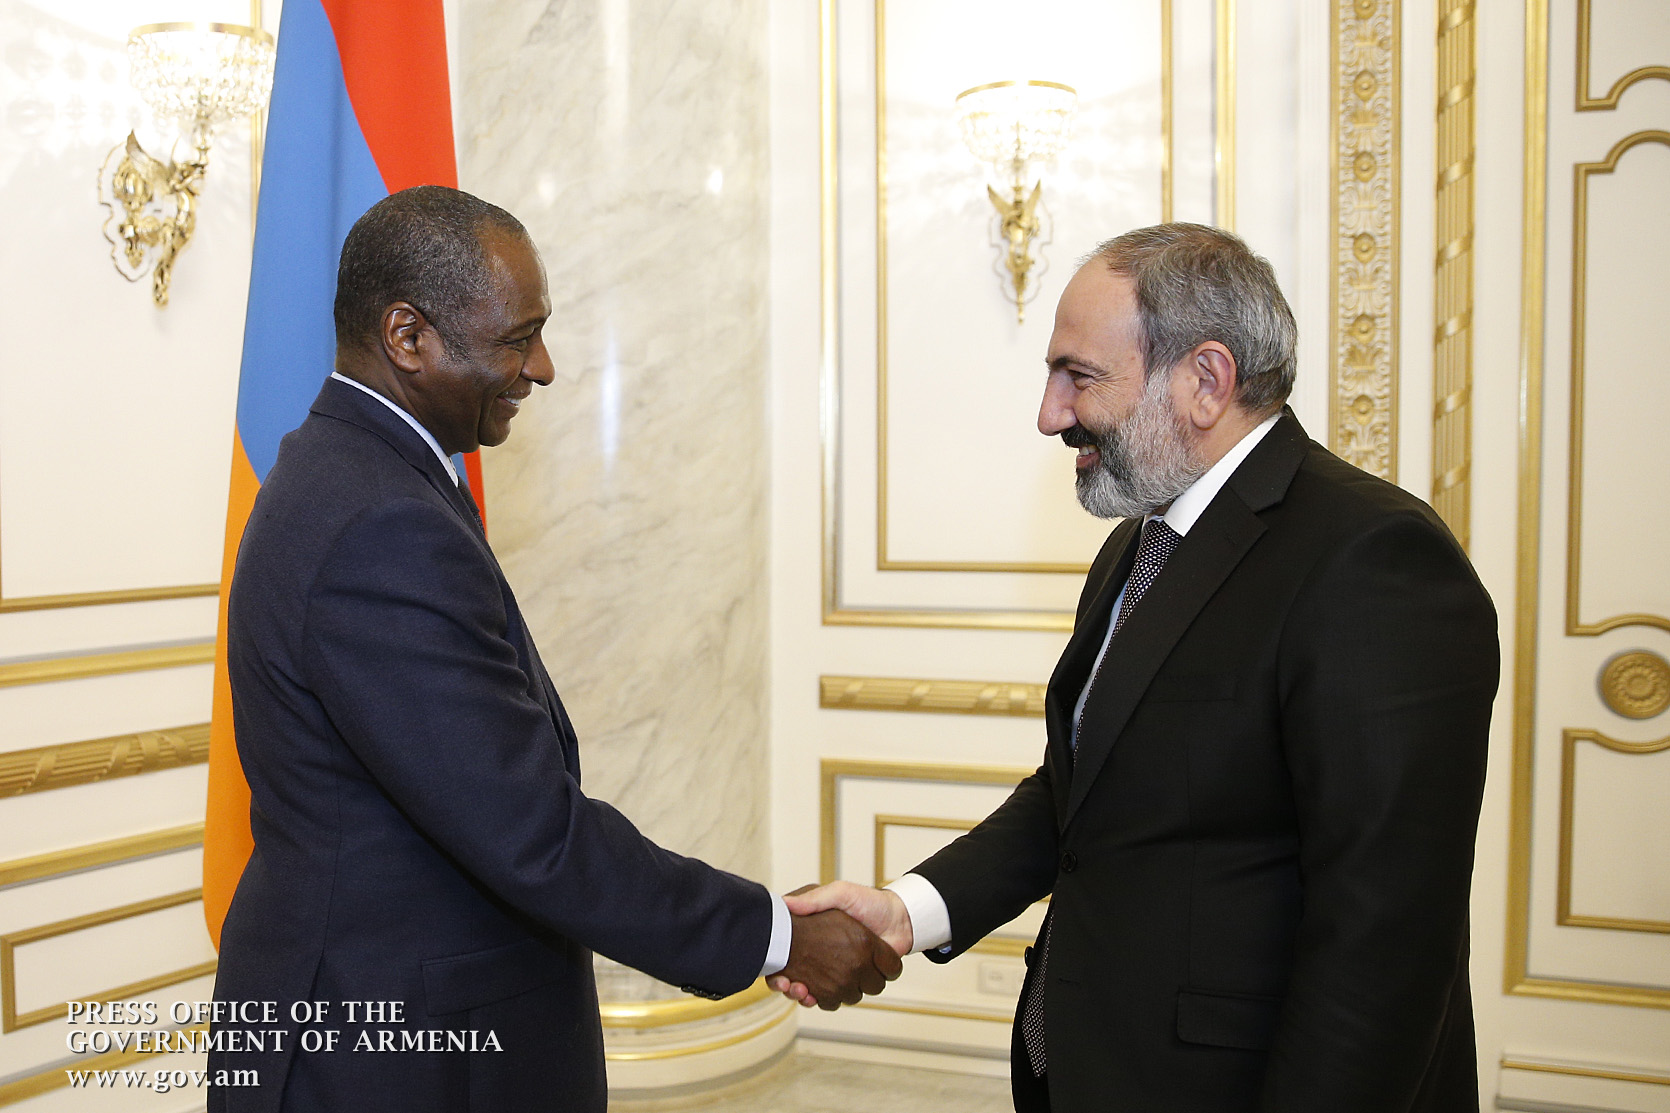 As the leader of the country that chairs the International Organization of La Francophonie, Nikol Pashinyan signs OIF Secretary General’s employment contract